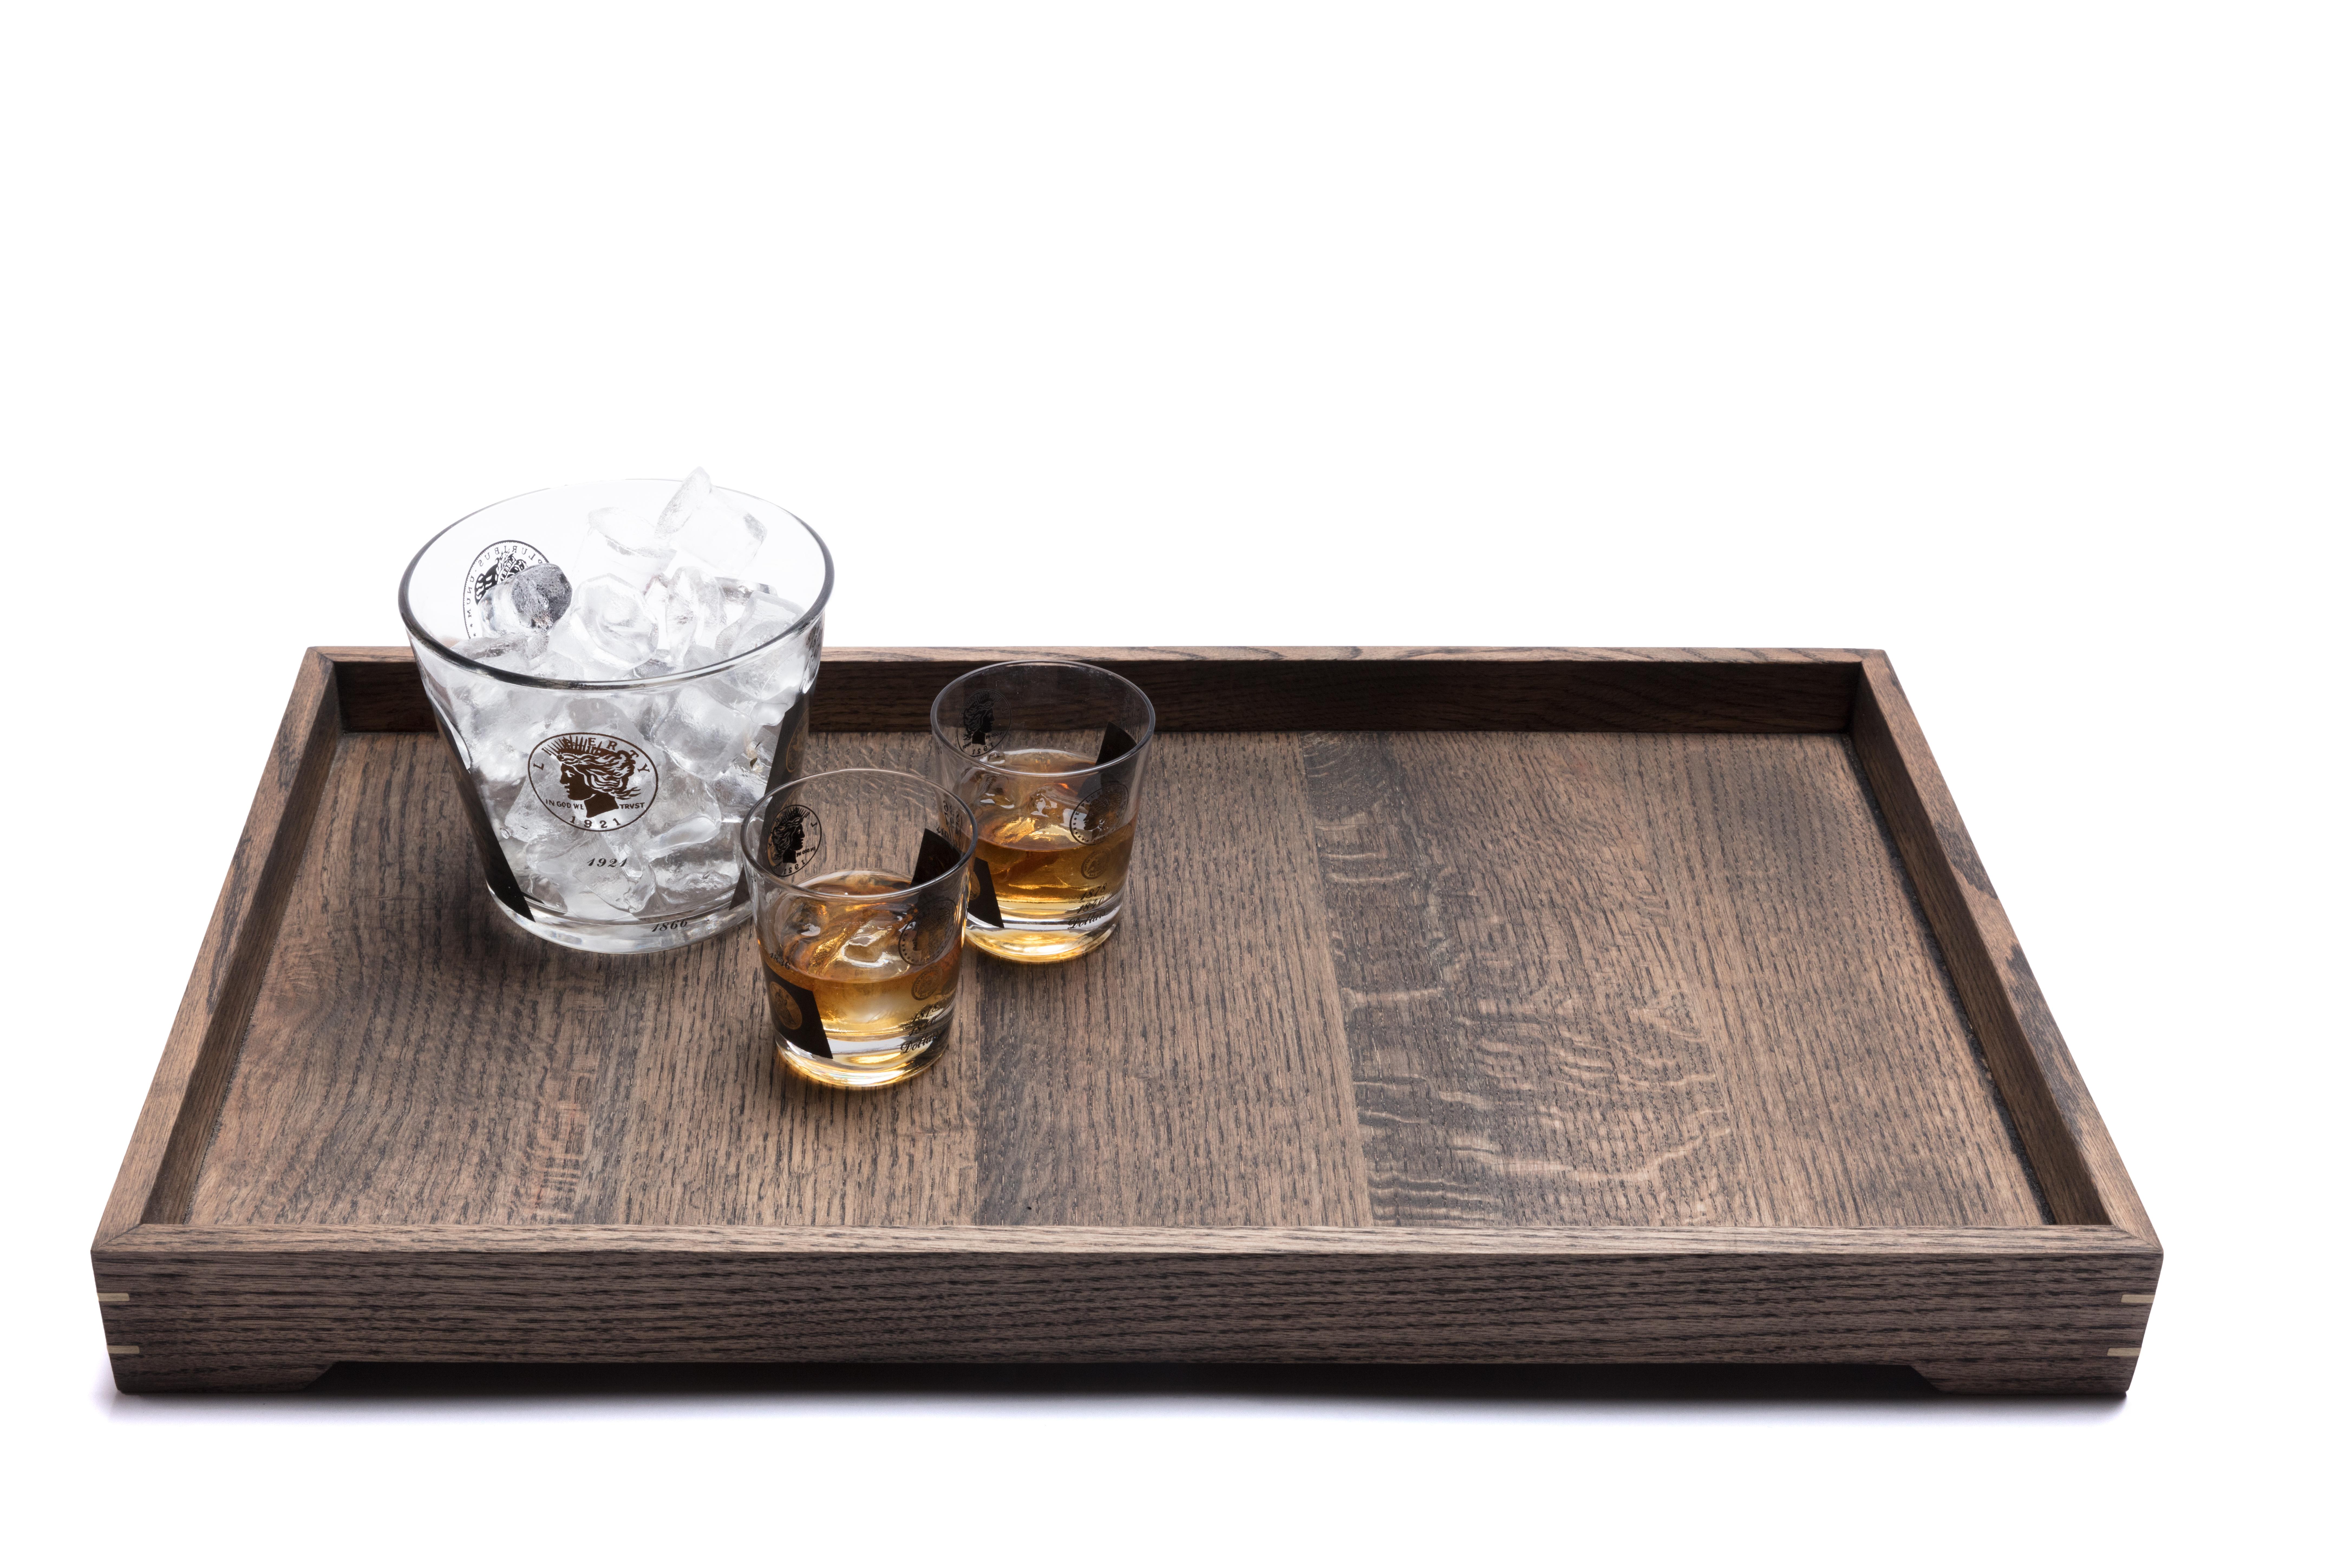 We made this solid ebonized oak wood and brass tray for lazy sundays spent reading the paper with coffee and scones, but it would be perfect to use for hosting an afternoon tea, or as barware to pass out drinks at a cocktail party. When not in use,